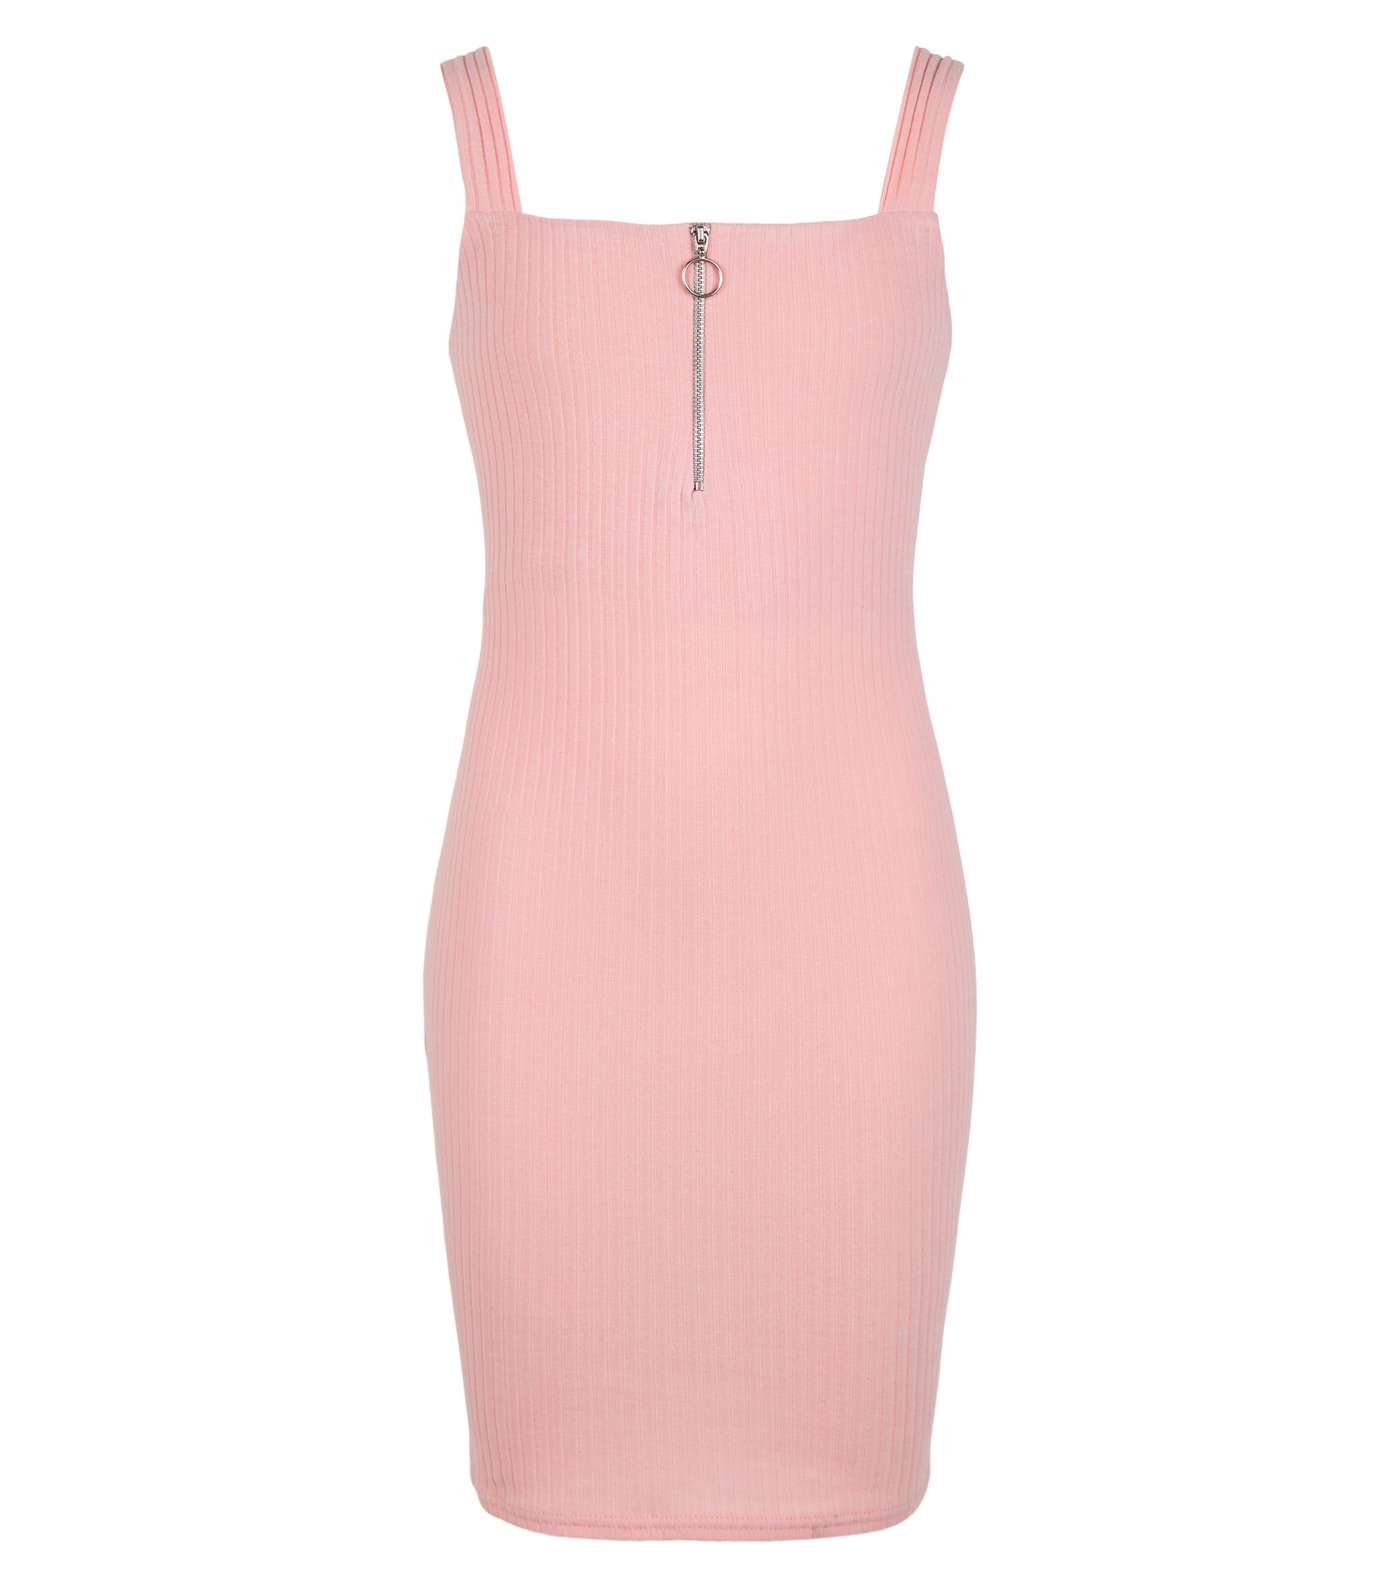 Girls Pale Pink Zip Front Bodycon Dress  Image 4